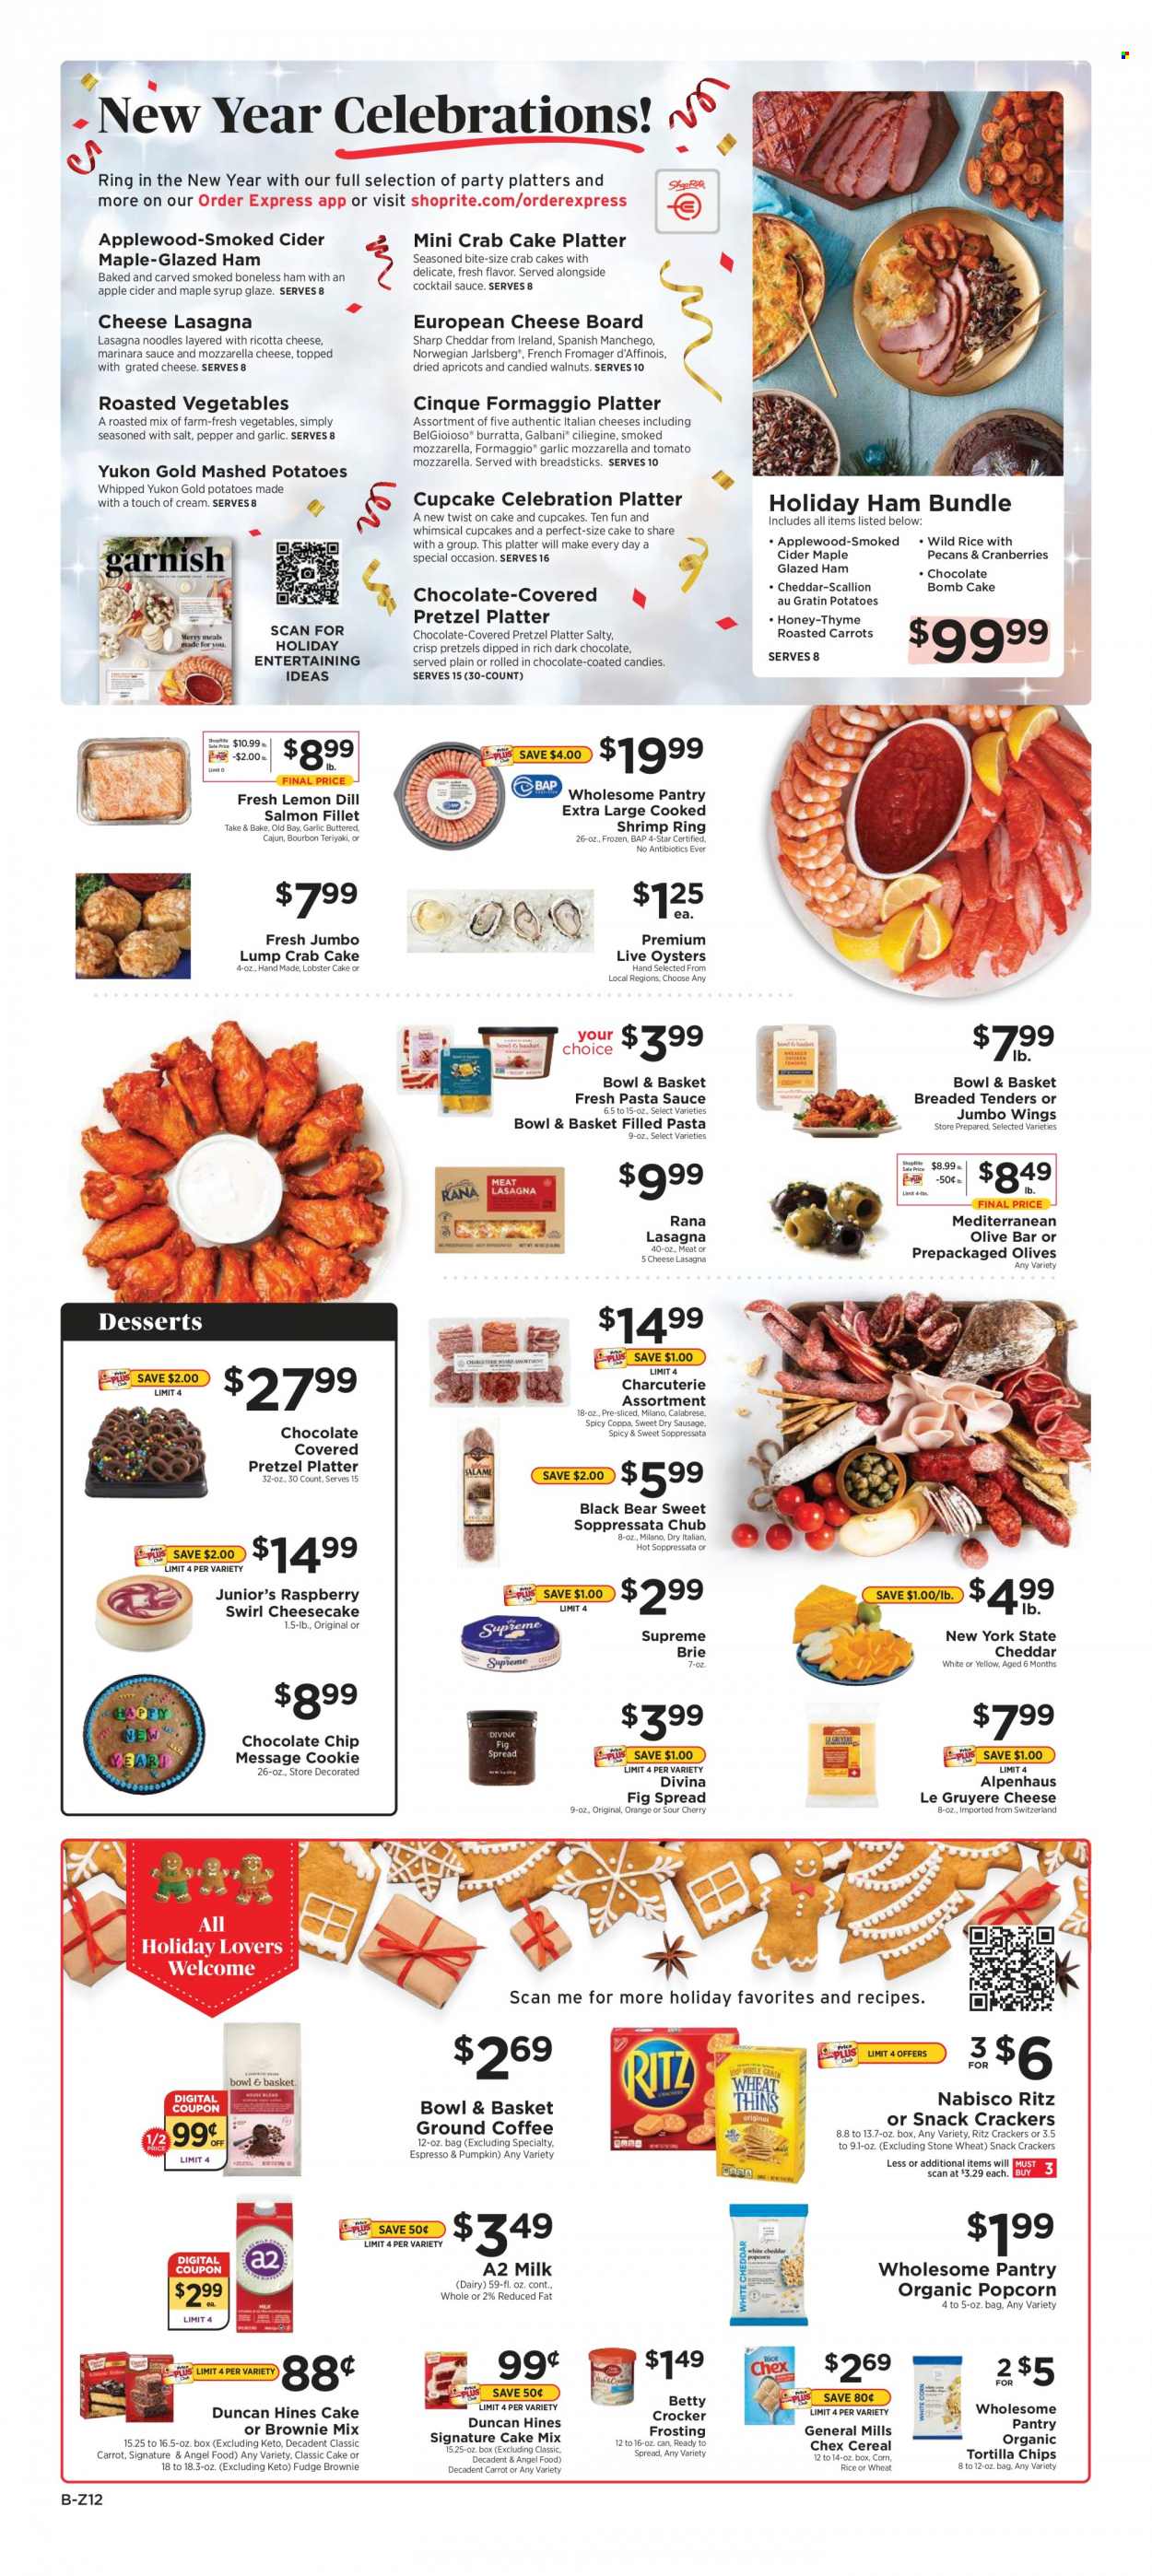 thumbnail - ShopRite Flyer - 12/26/2021 - 01/01/2022 - Sales products - pretzels, Bowl & Basket, cupcake, cheesecake, Angel Food, brownie mix, cake mix, garlic, oranges, apricots, lobster, salmon, salmon fillet, oysters, shrimps, crab cake, mashed potatoes, pasta sauce, noodles, lasagna meal, Rana, filled pasta, soppressata, ham, sausage, Gruyere, Manchego, mozzarella, ricotta, brie, grated cheese, Galbani, milk, fudge, Celebration, crackers, dark chocolate, RITZ, bread sticks, tortilla chips, popcorn, frosting, cranberries, olives, cereals, dill, cocktail sauce, maple syrup, honey, syrup, walnuts, pecans, dried fruit, apple cider, cider, cheese board. Page 2.